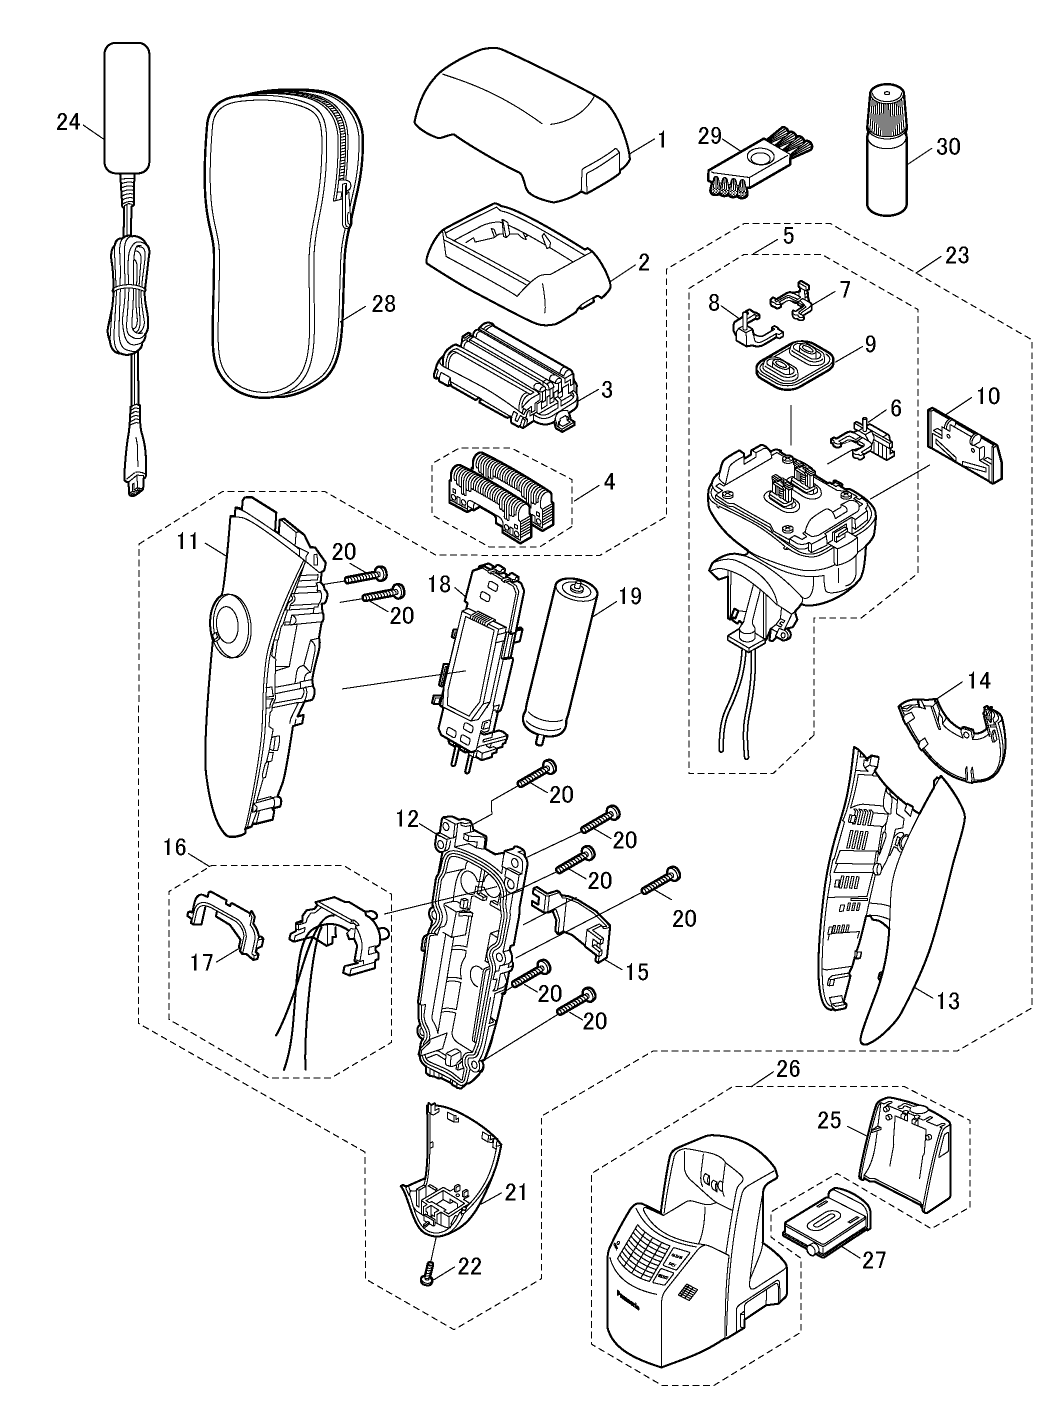 ES-LV81: Exploded View